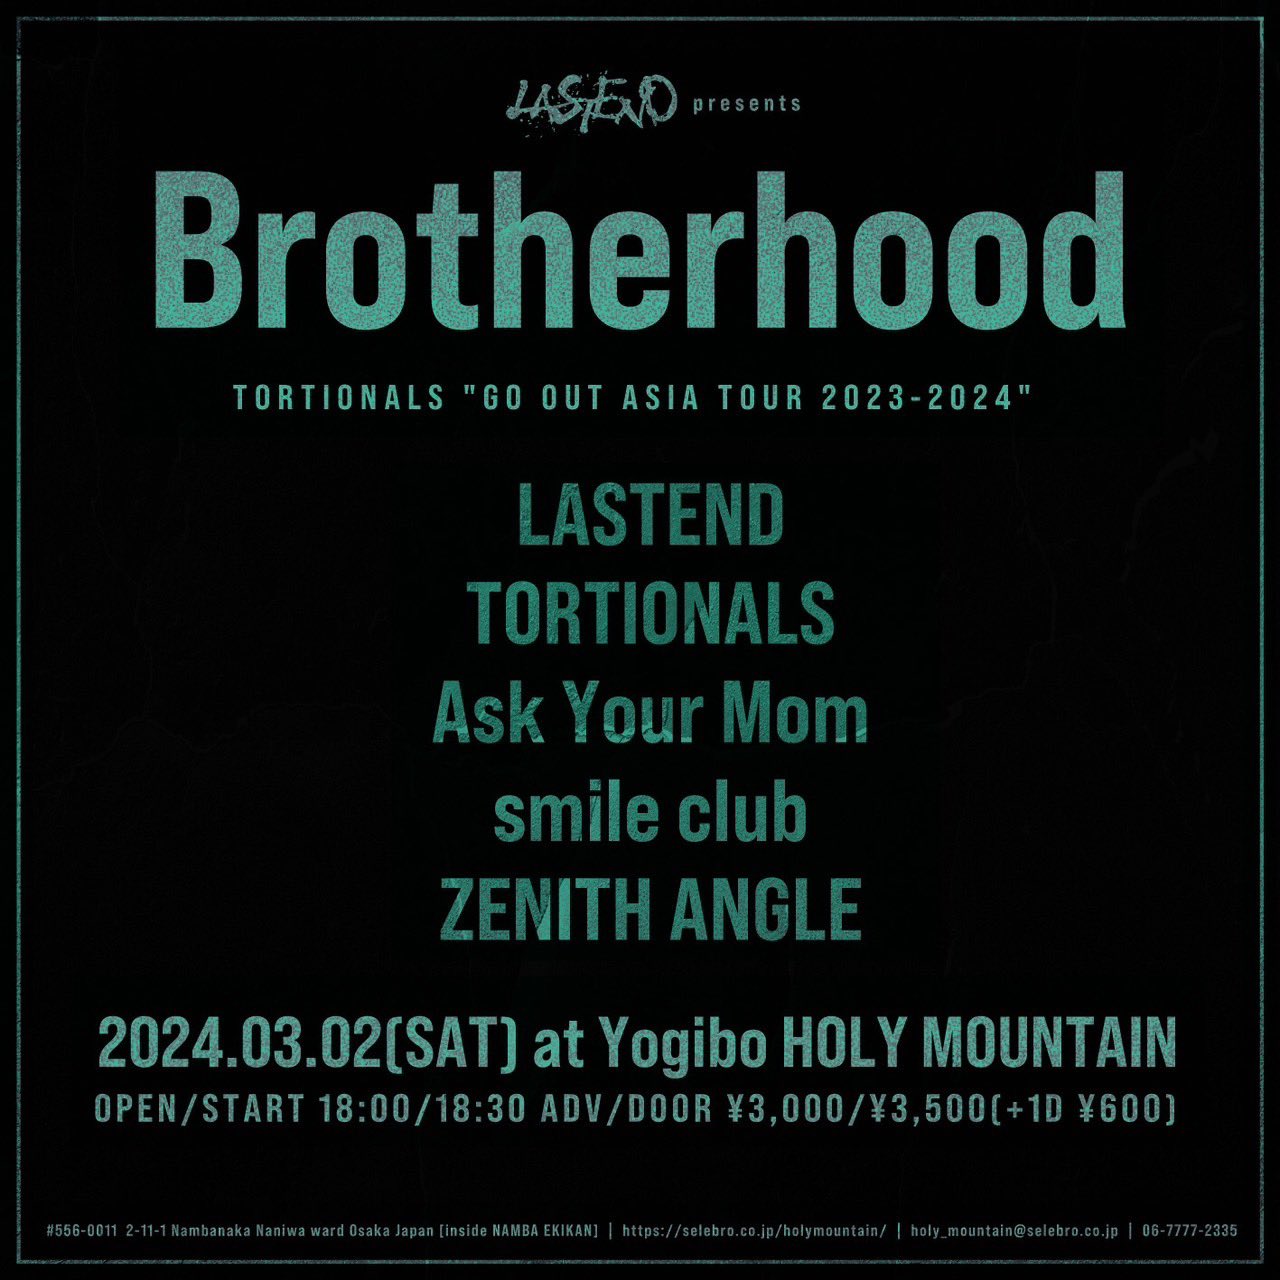 LASTEND pre Brotherhood<br>TORTIONALS “GO OUT ASIA TOUR 2023-2024”